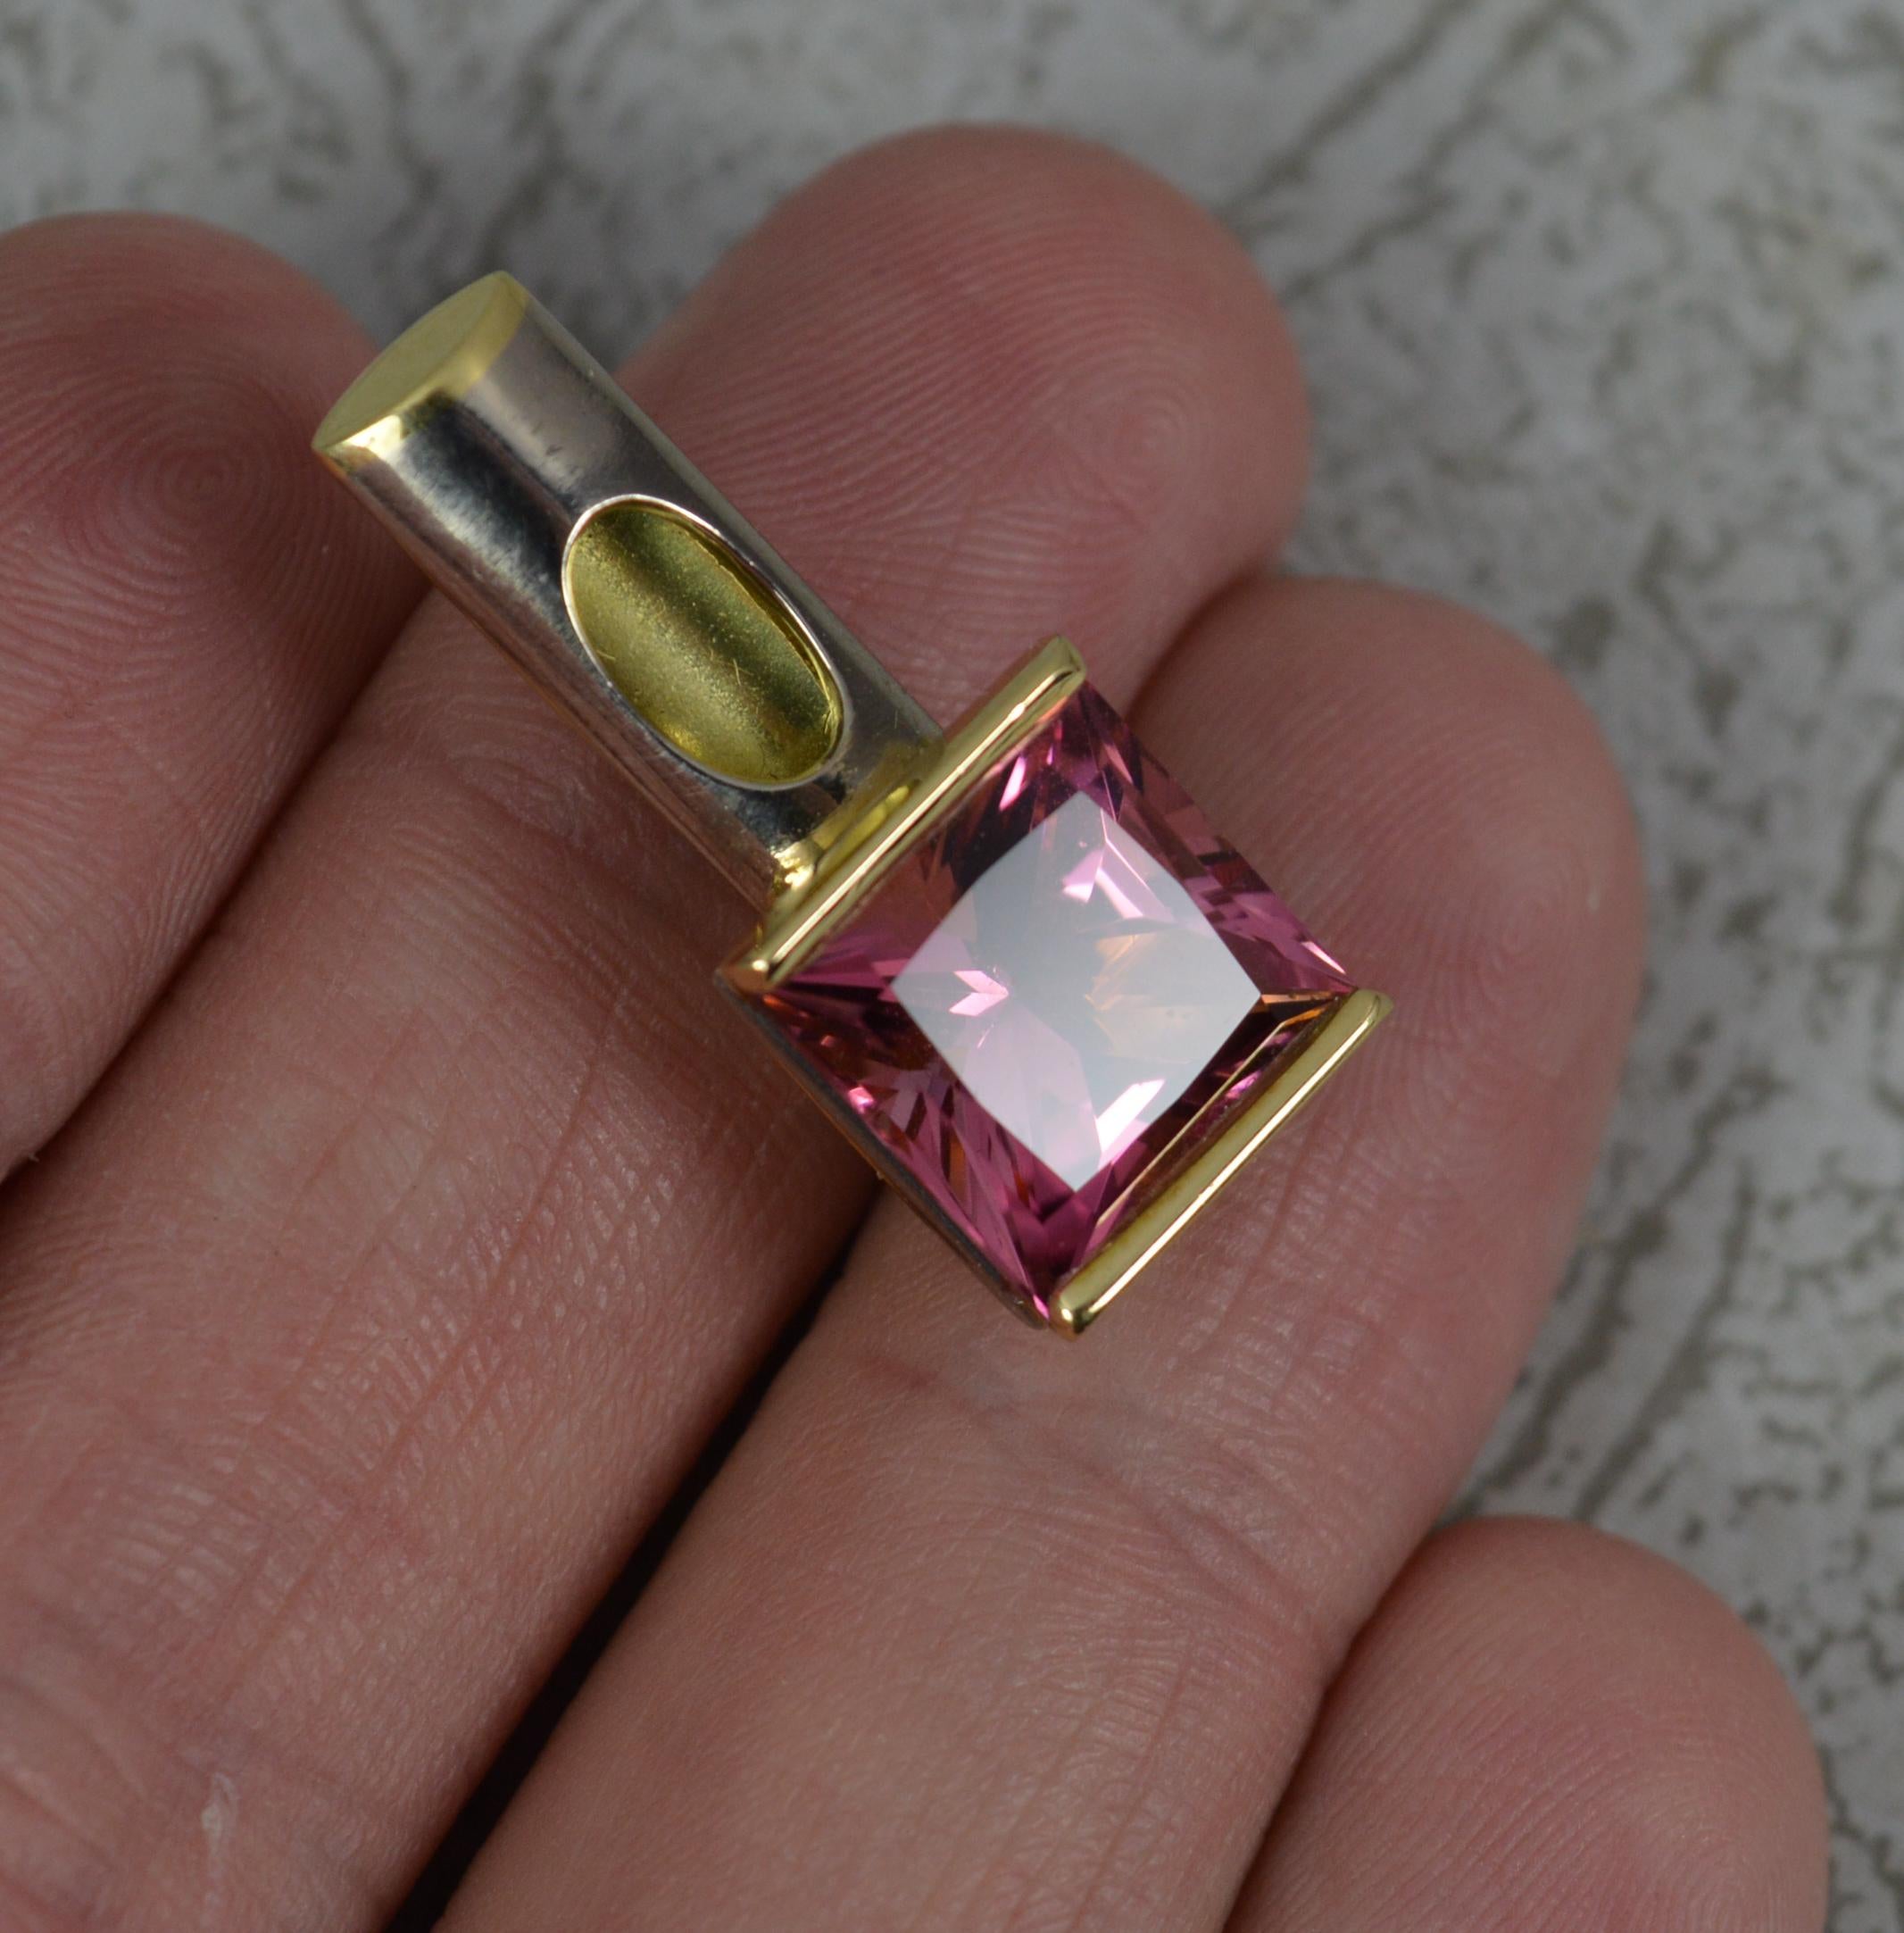 A superb statement pendant.
Solid 18 carat yellow gold example.
Designed with a princess cut vivid, pink tourmaline stone to base.

CONDITION ; Excellent. Beautiful example. Polished. Well set stones. Strong hinge to clasp. Please view